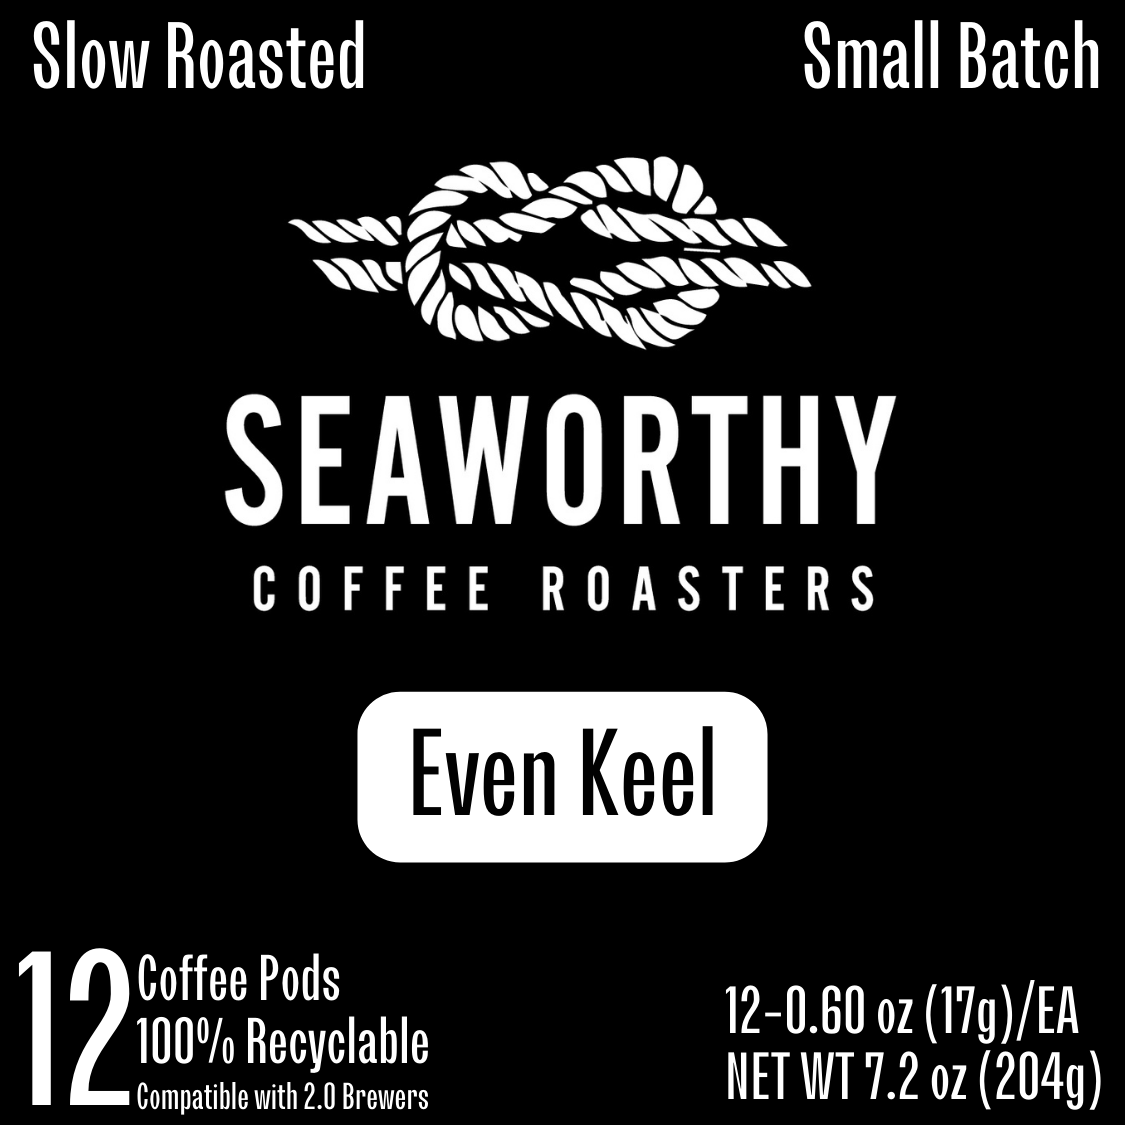 Seaworthy Even Keel Coffee Pods.  Slow Roasted.  Small Batch.  Medium roast coffee pods.  Recyclable coffee pods.  